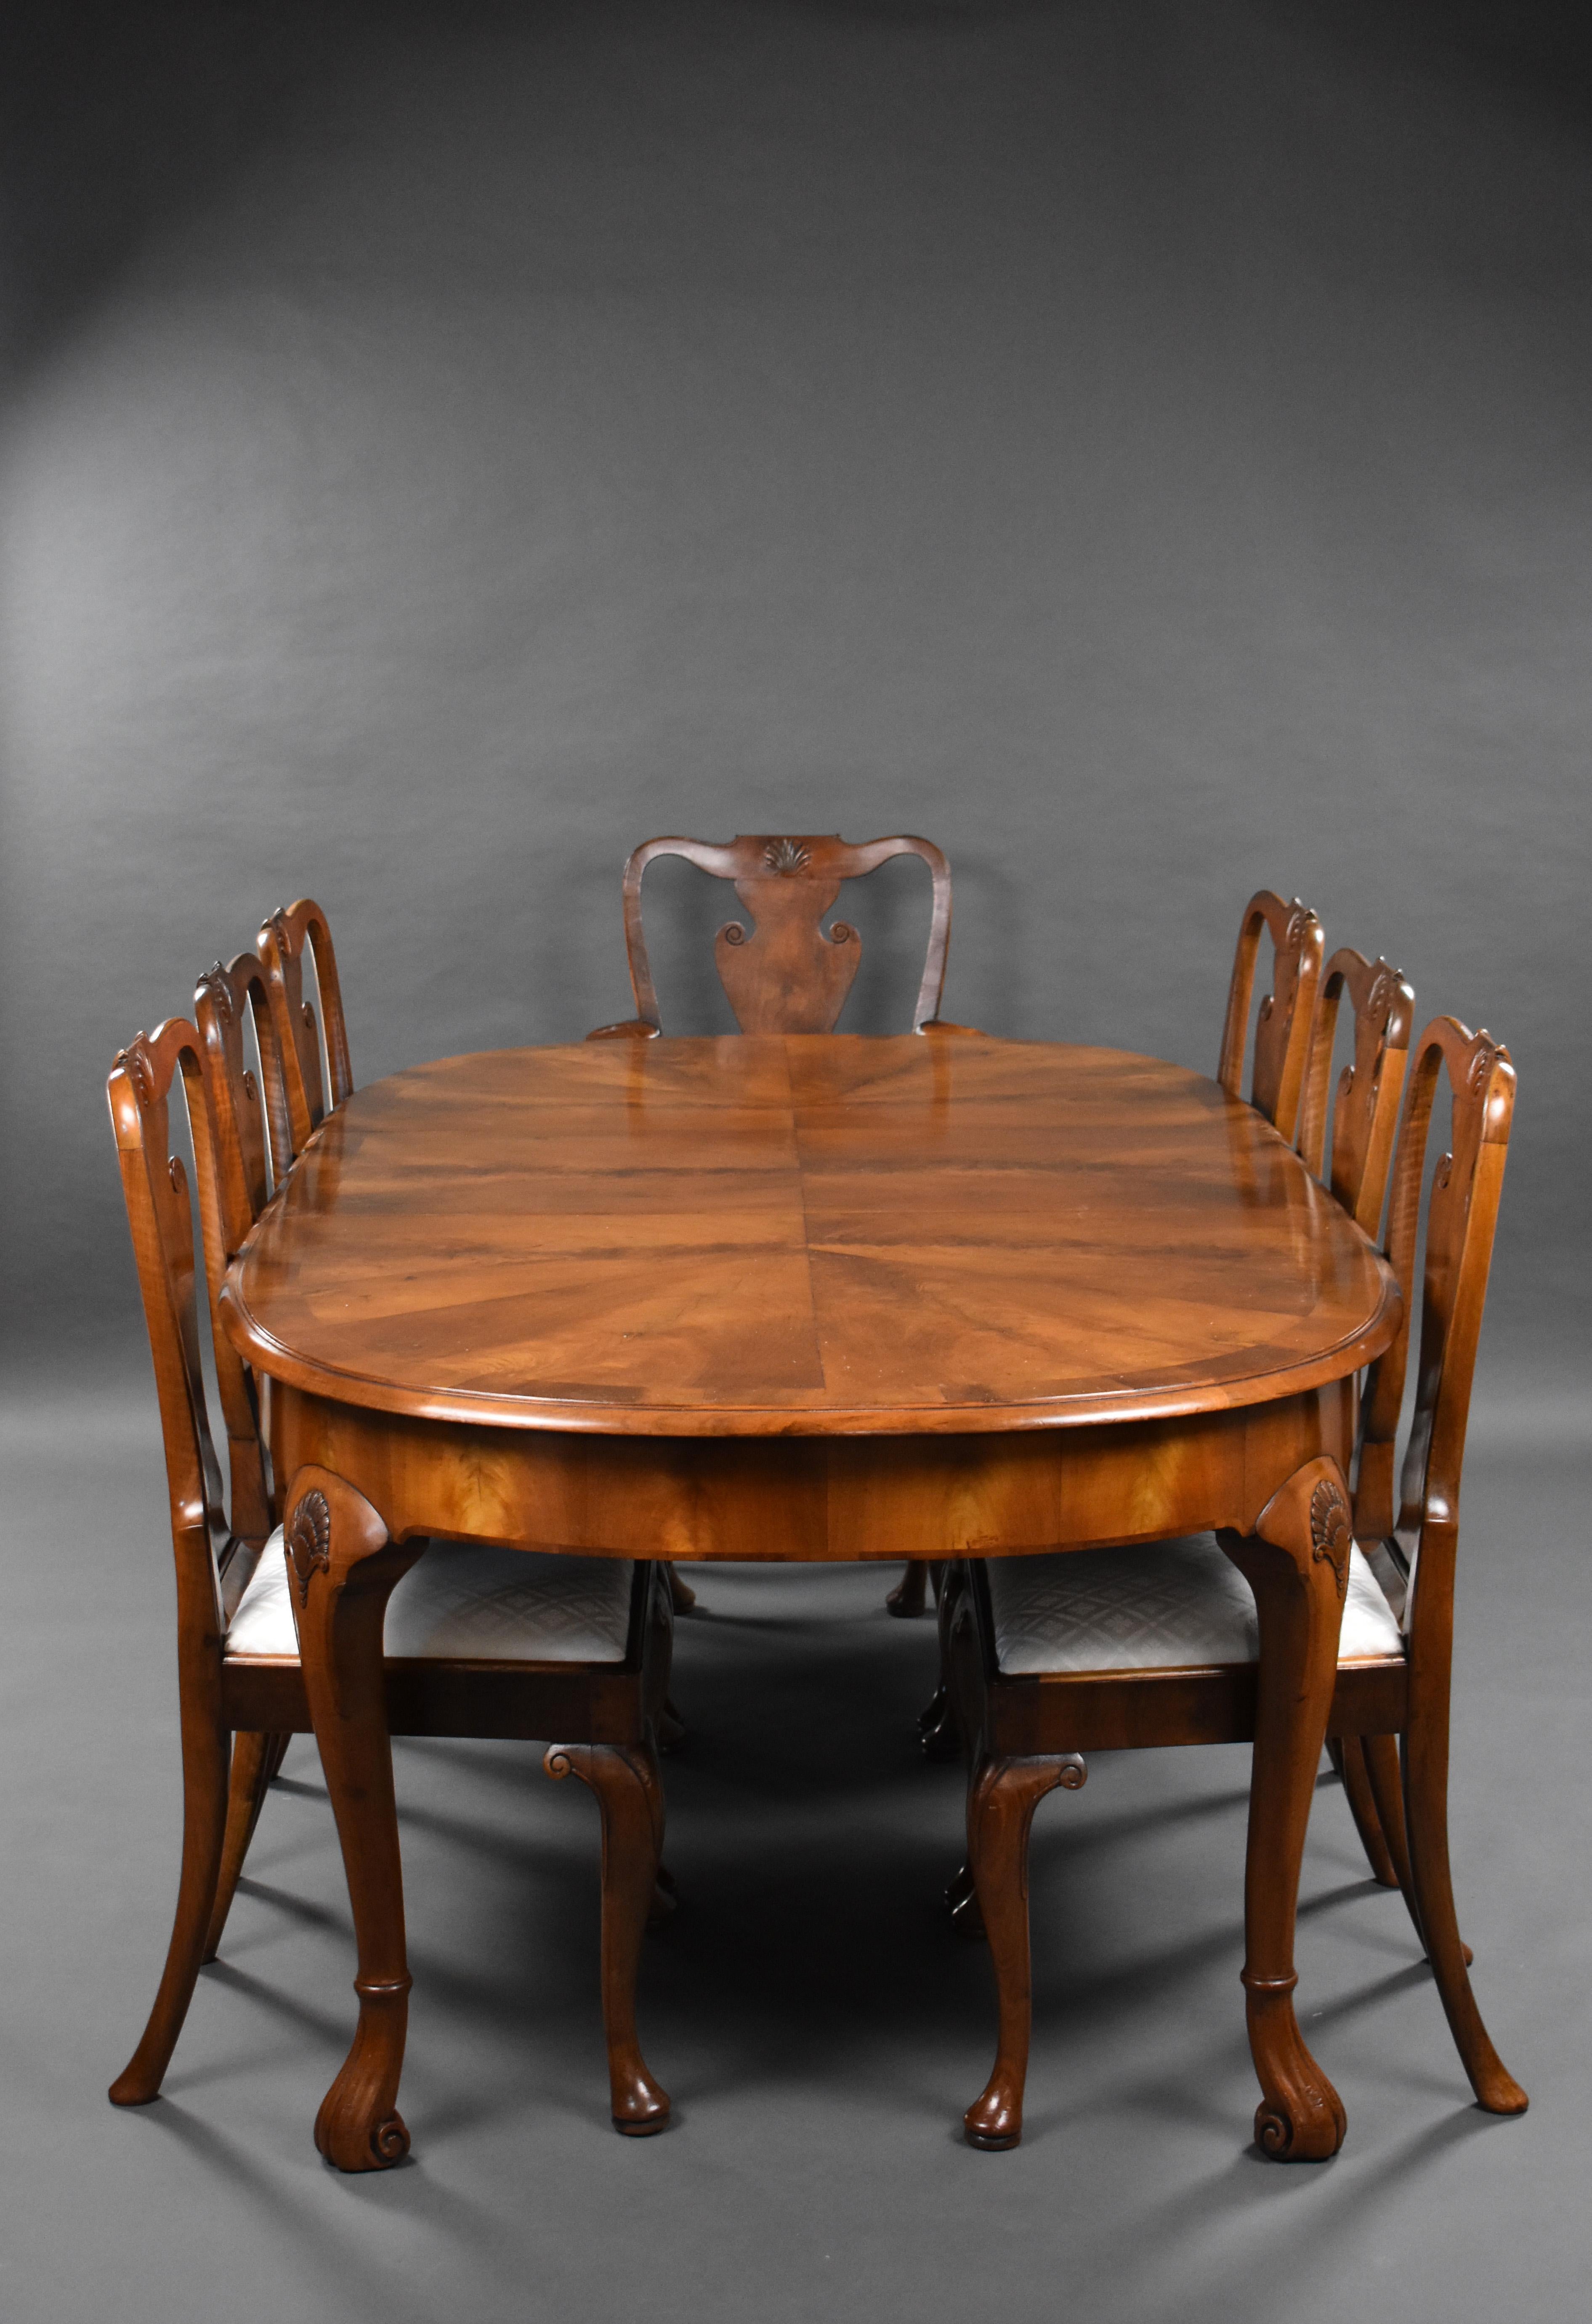 Queen Anne 20th Century English Antique Walnut Extending Dining Table & 8 Chairs